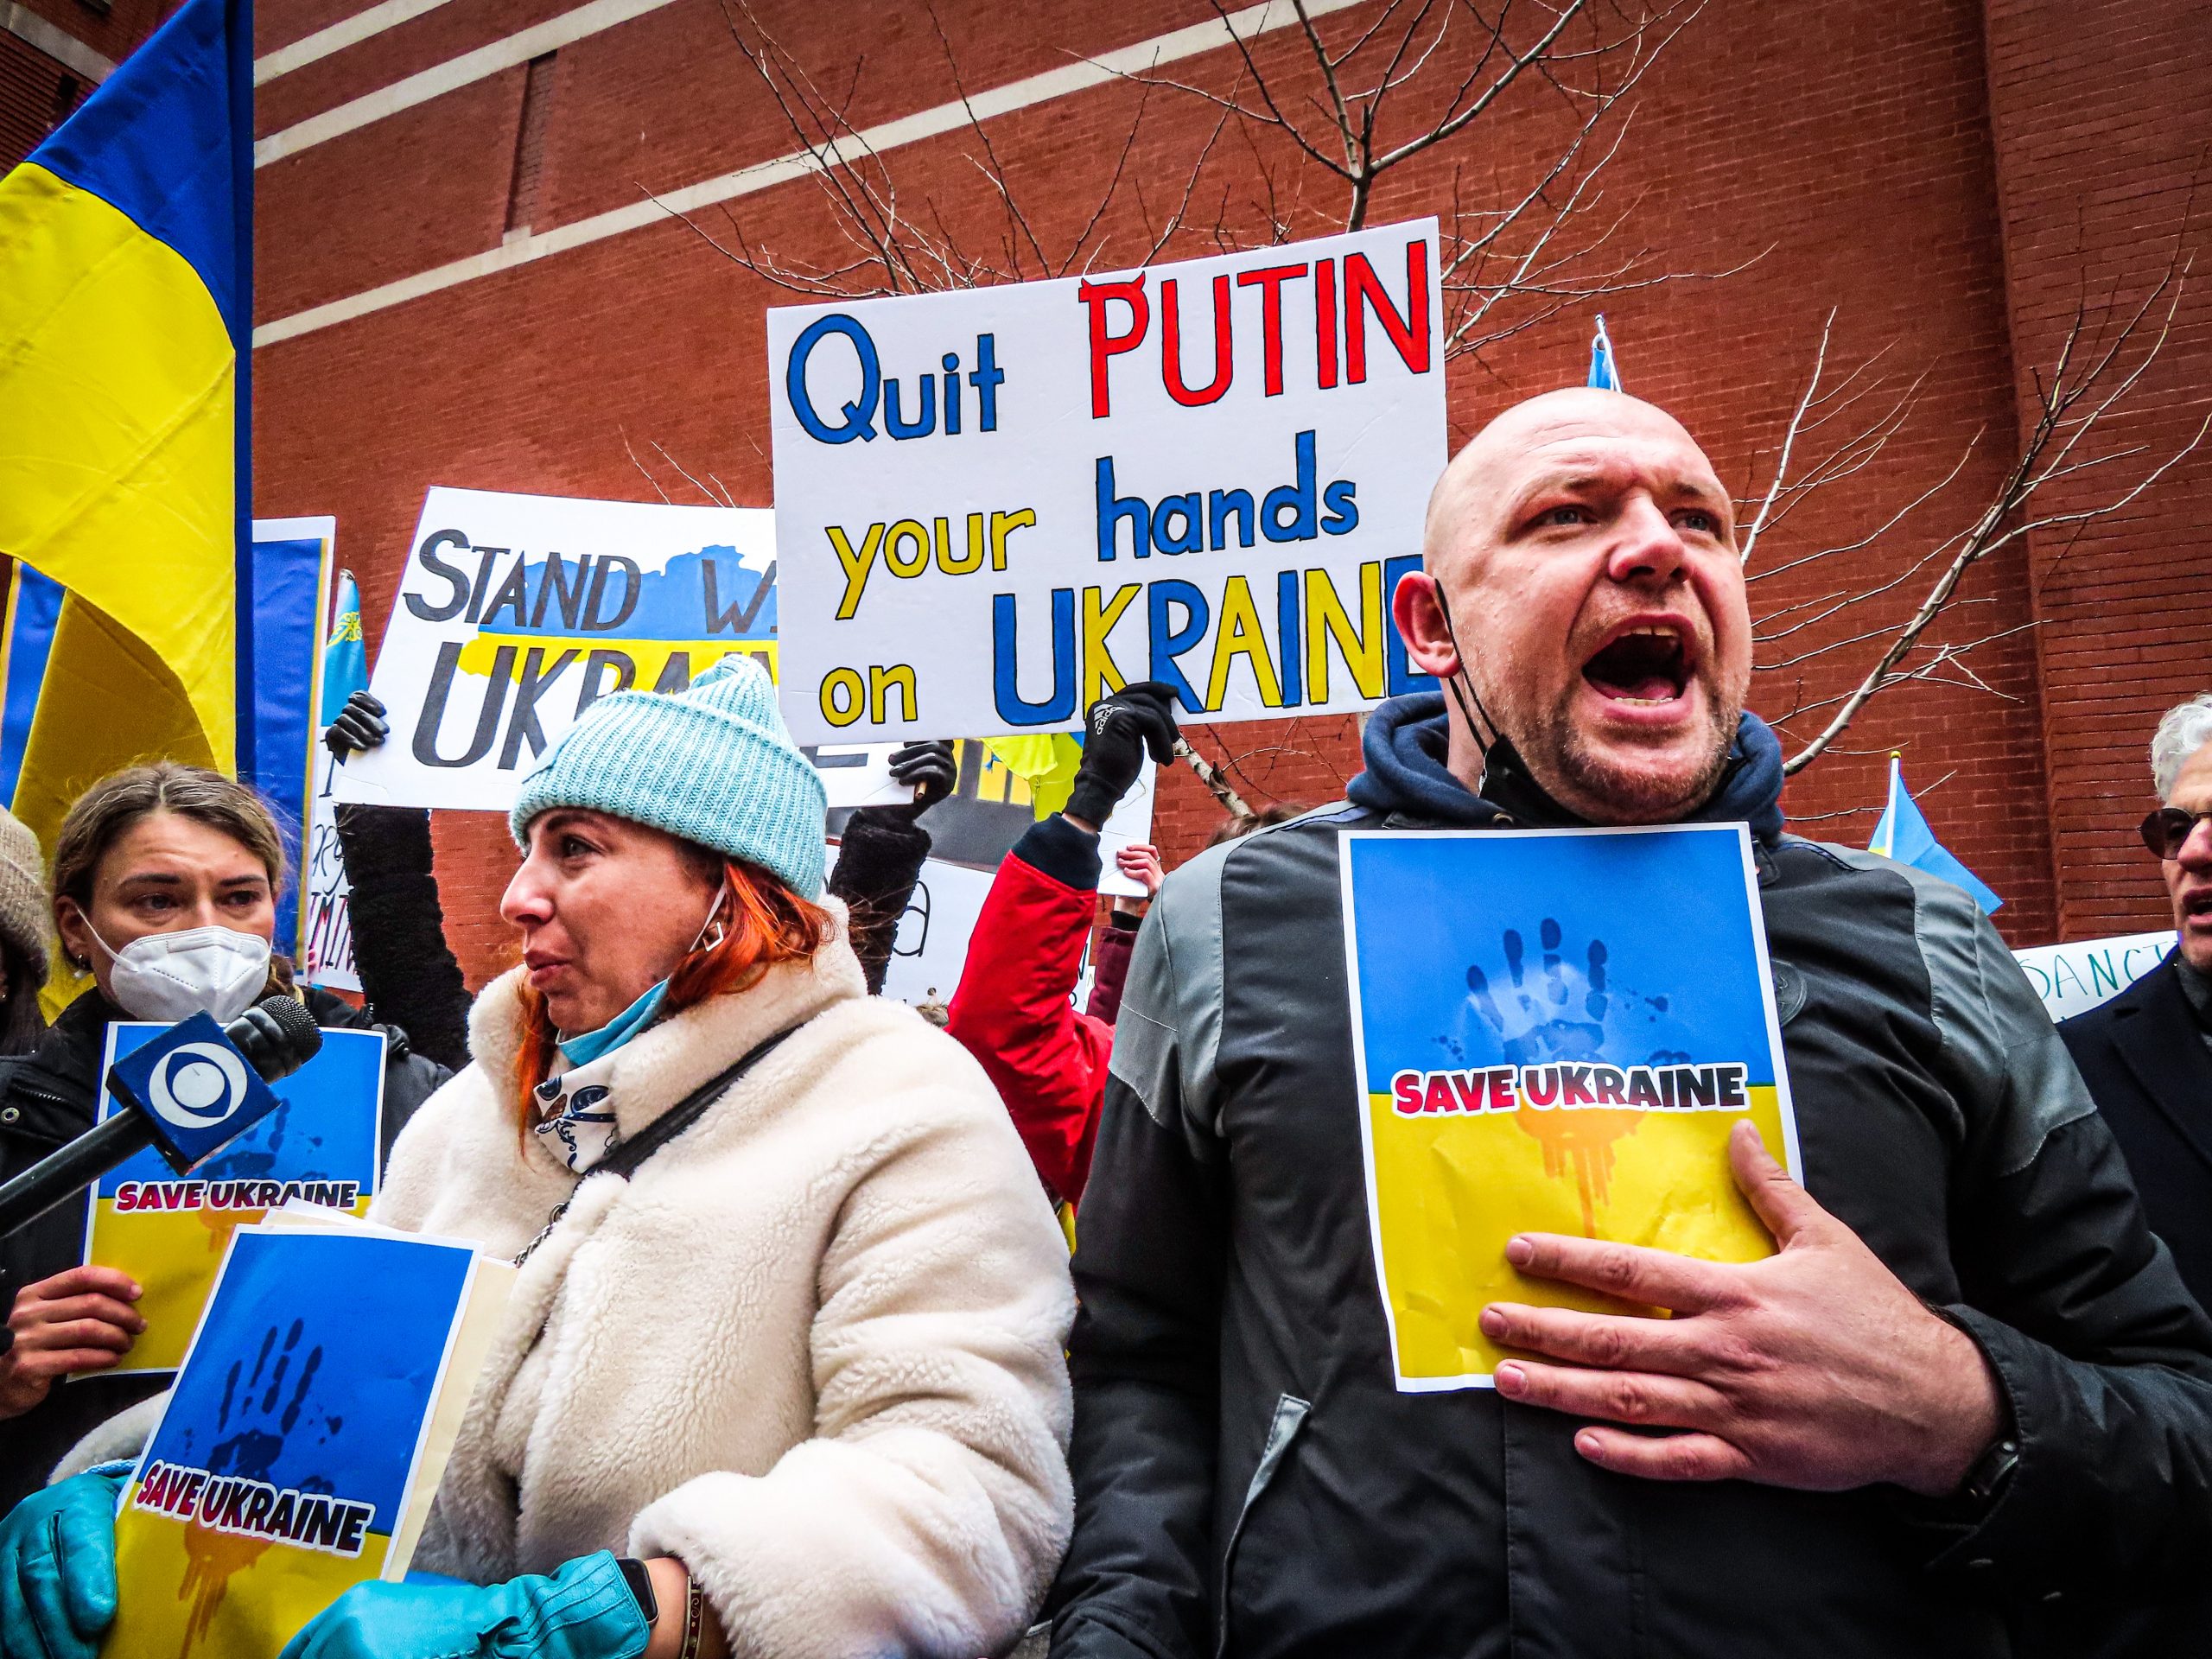 A man shouts during a demonstration for supporting Ukraine. Protesters hold signs denouncing Putin and Ukrainian flags in blue and yellow.